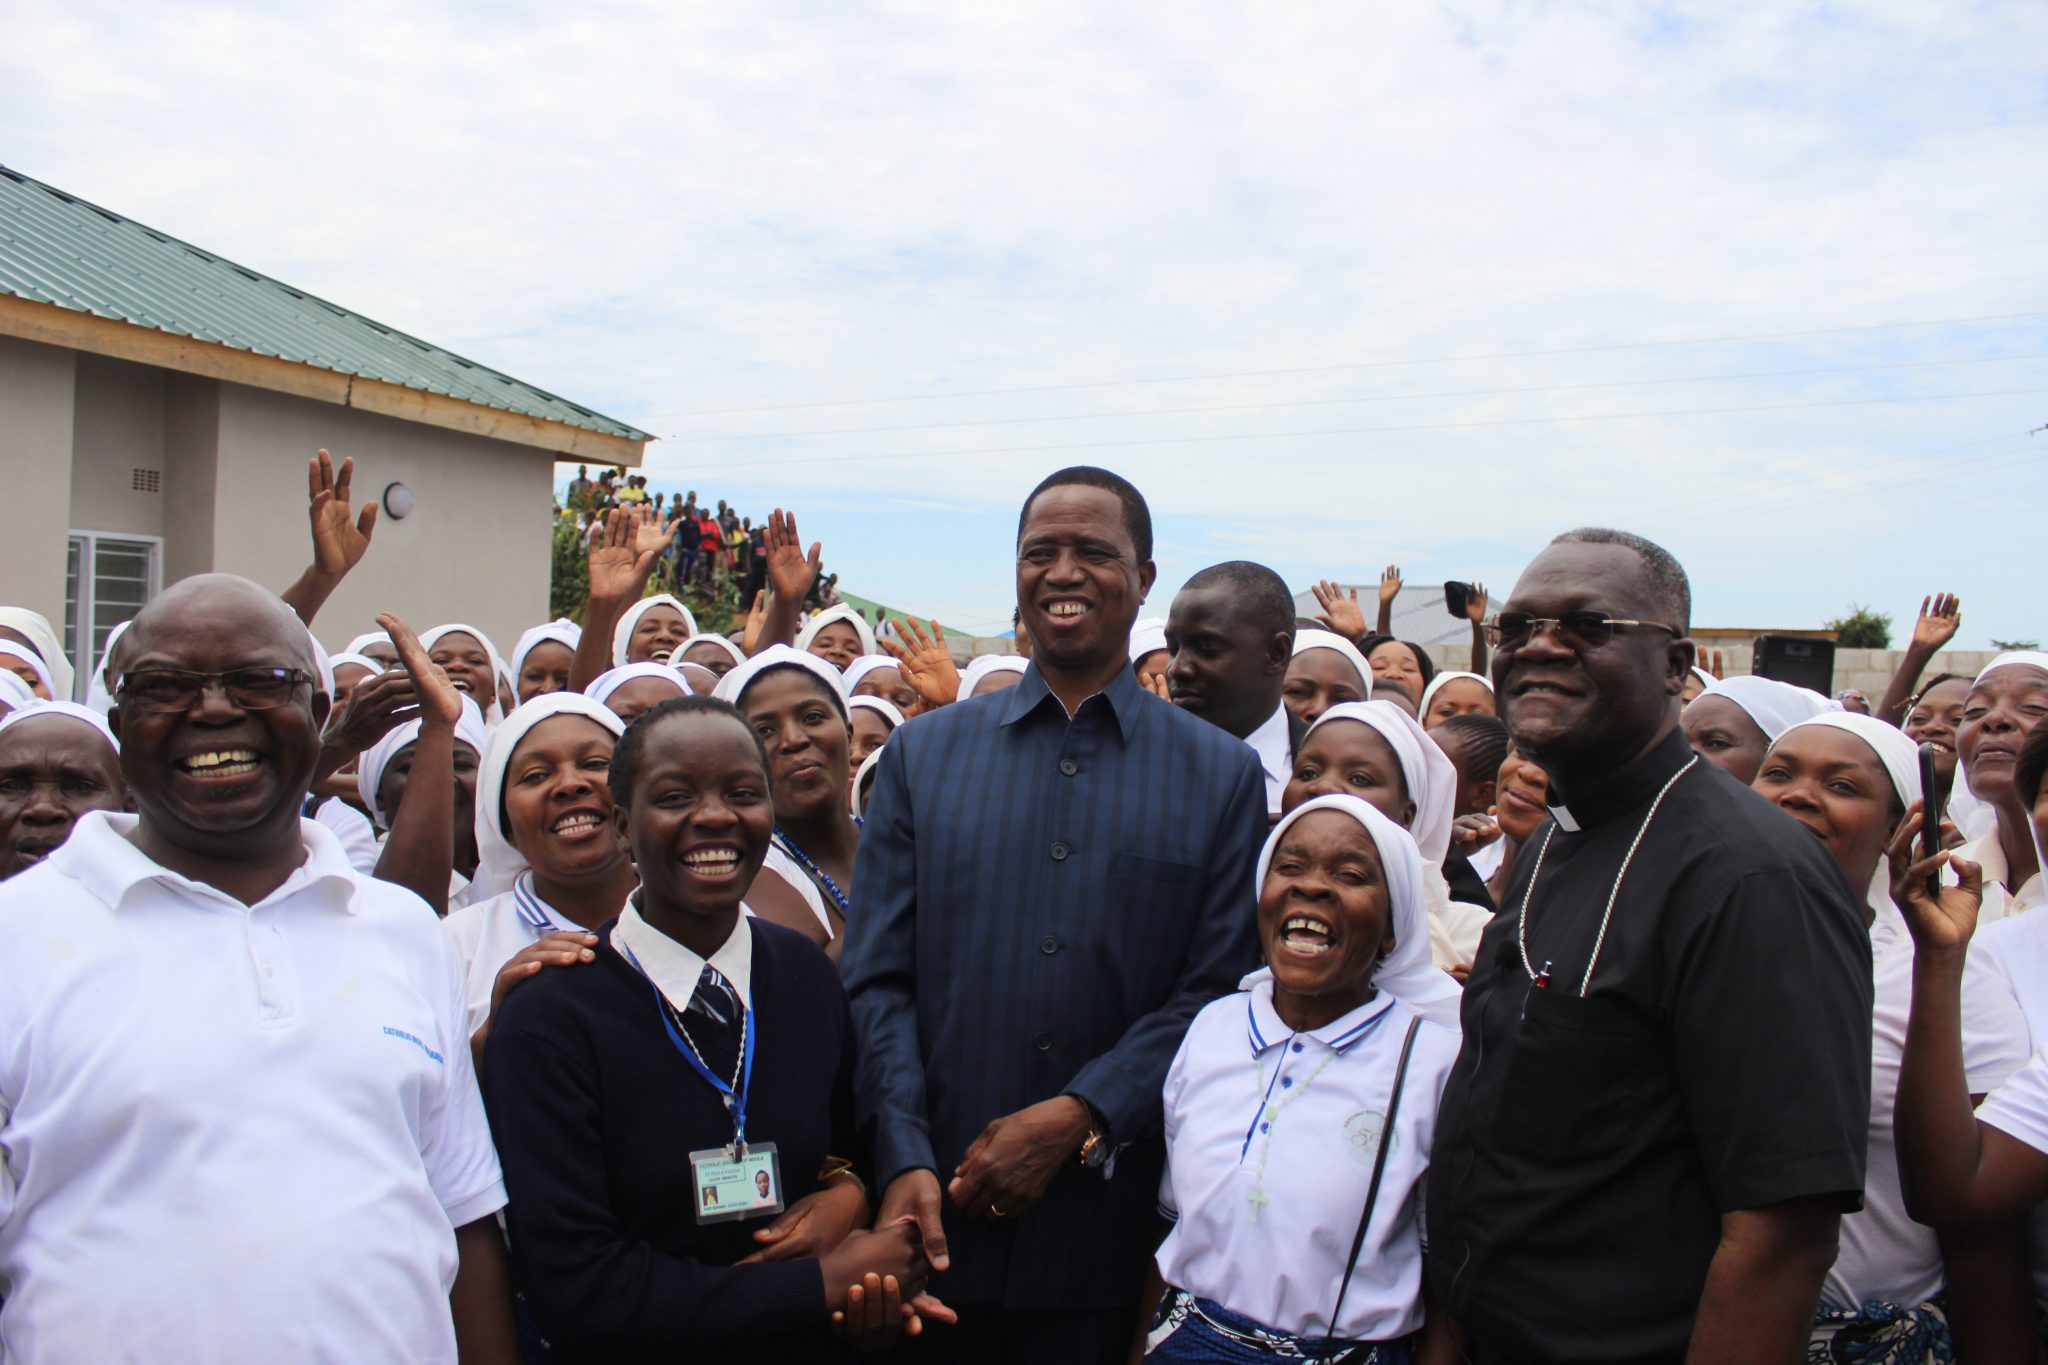 Commissioning of WoMF Kamenza Priests house By His Excellency, The President Mr. Edgar Lungu.- [In Pictures]